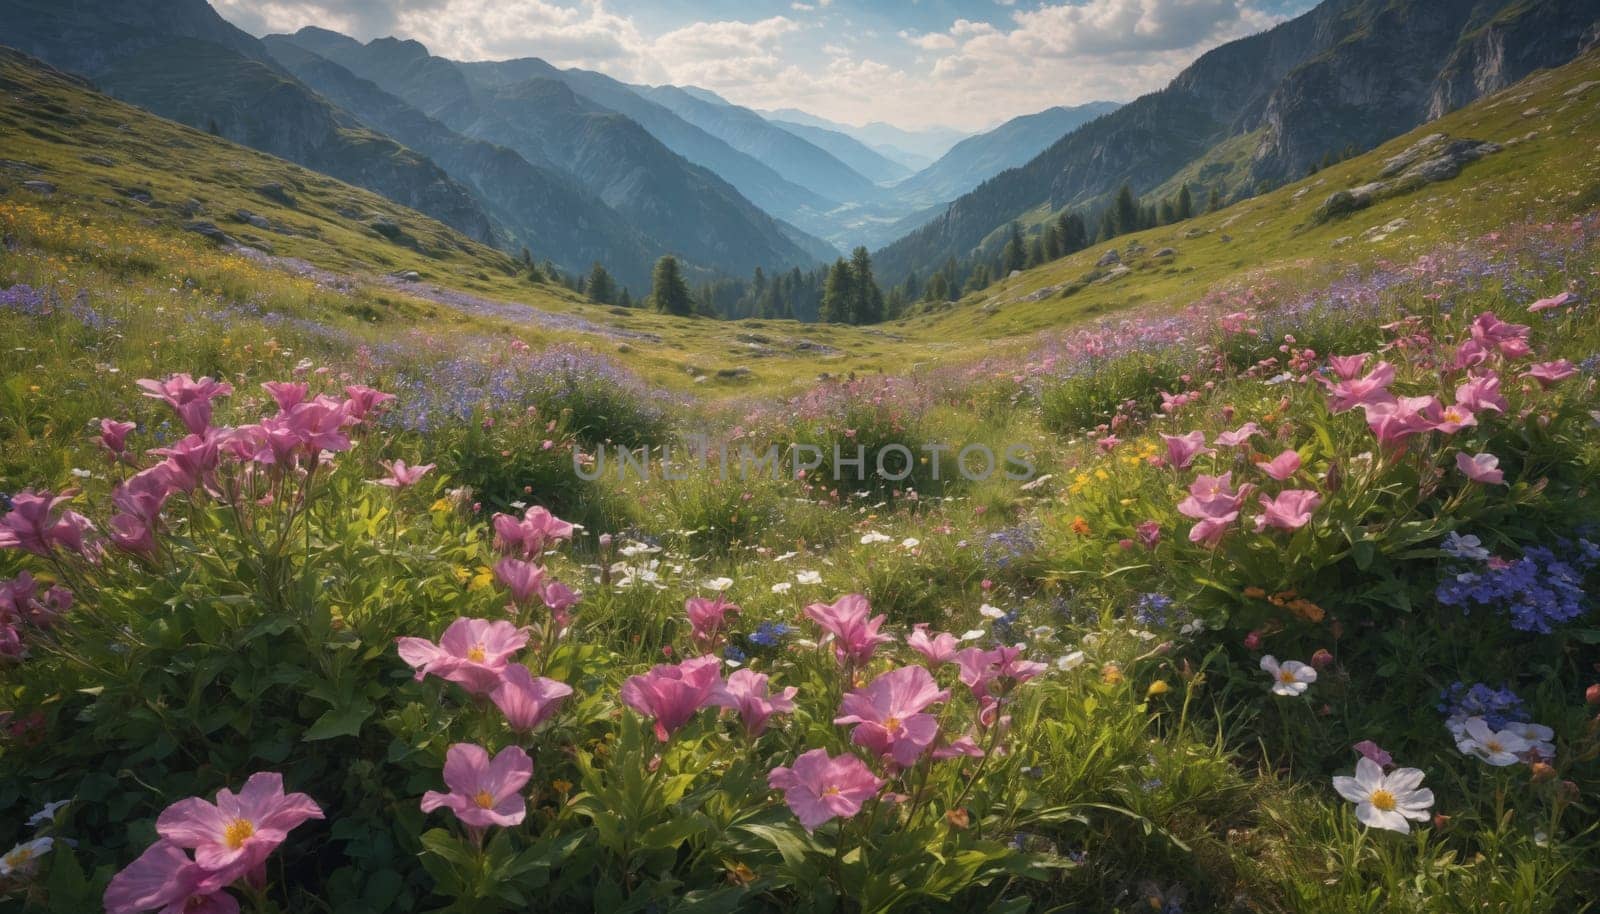 A vibrant field of wildflowers in full bloom stretches out before a breathtaking mountain range. The sun rises over the distant peaks, casting a warm glow over the landscape. The air is fresh and clean, and the serenity of the scene is palpable.